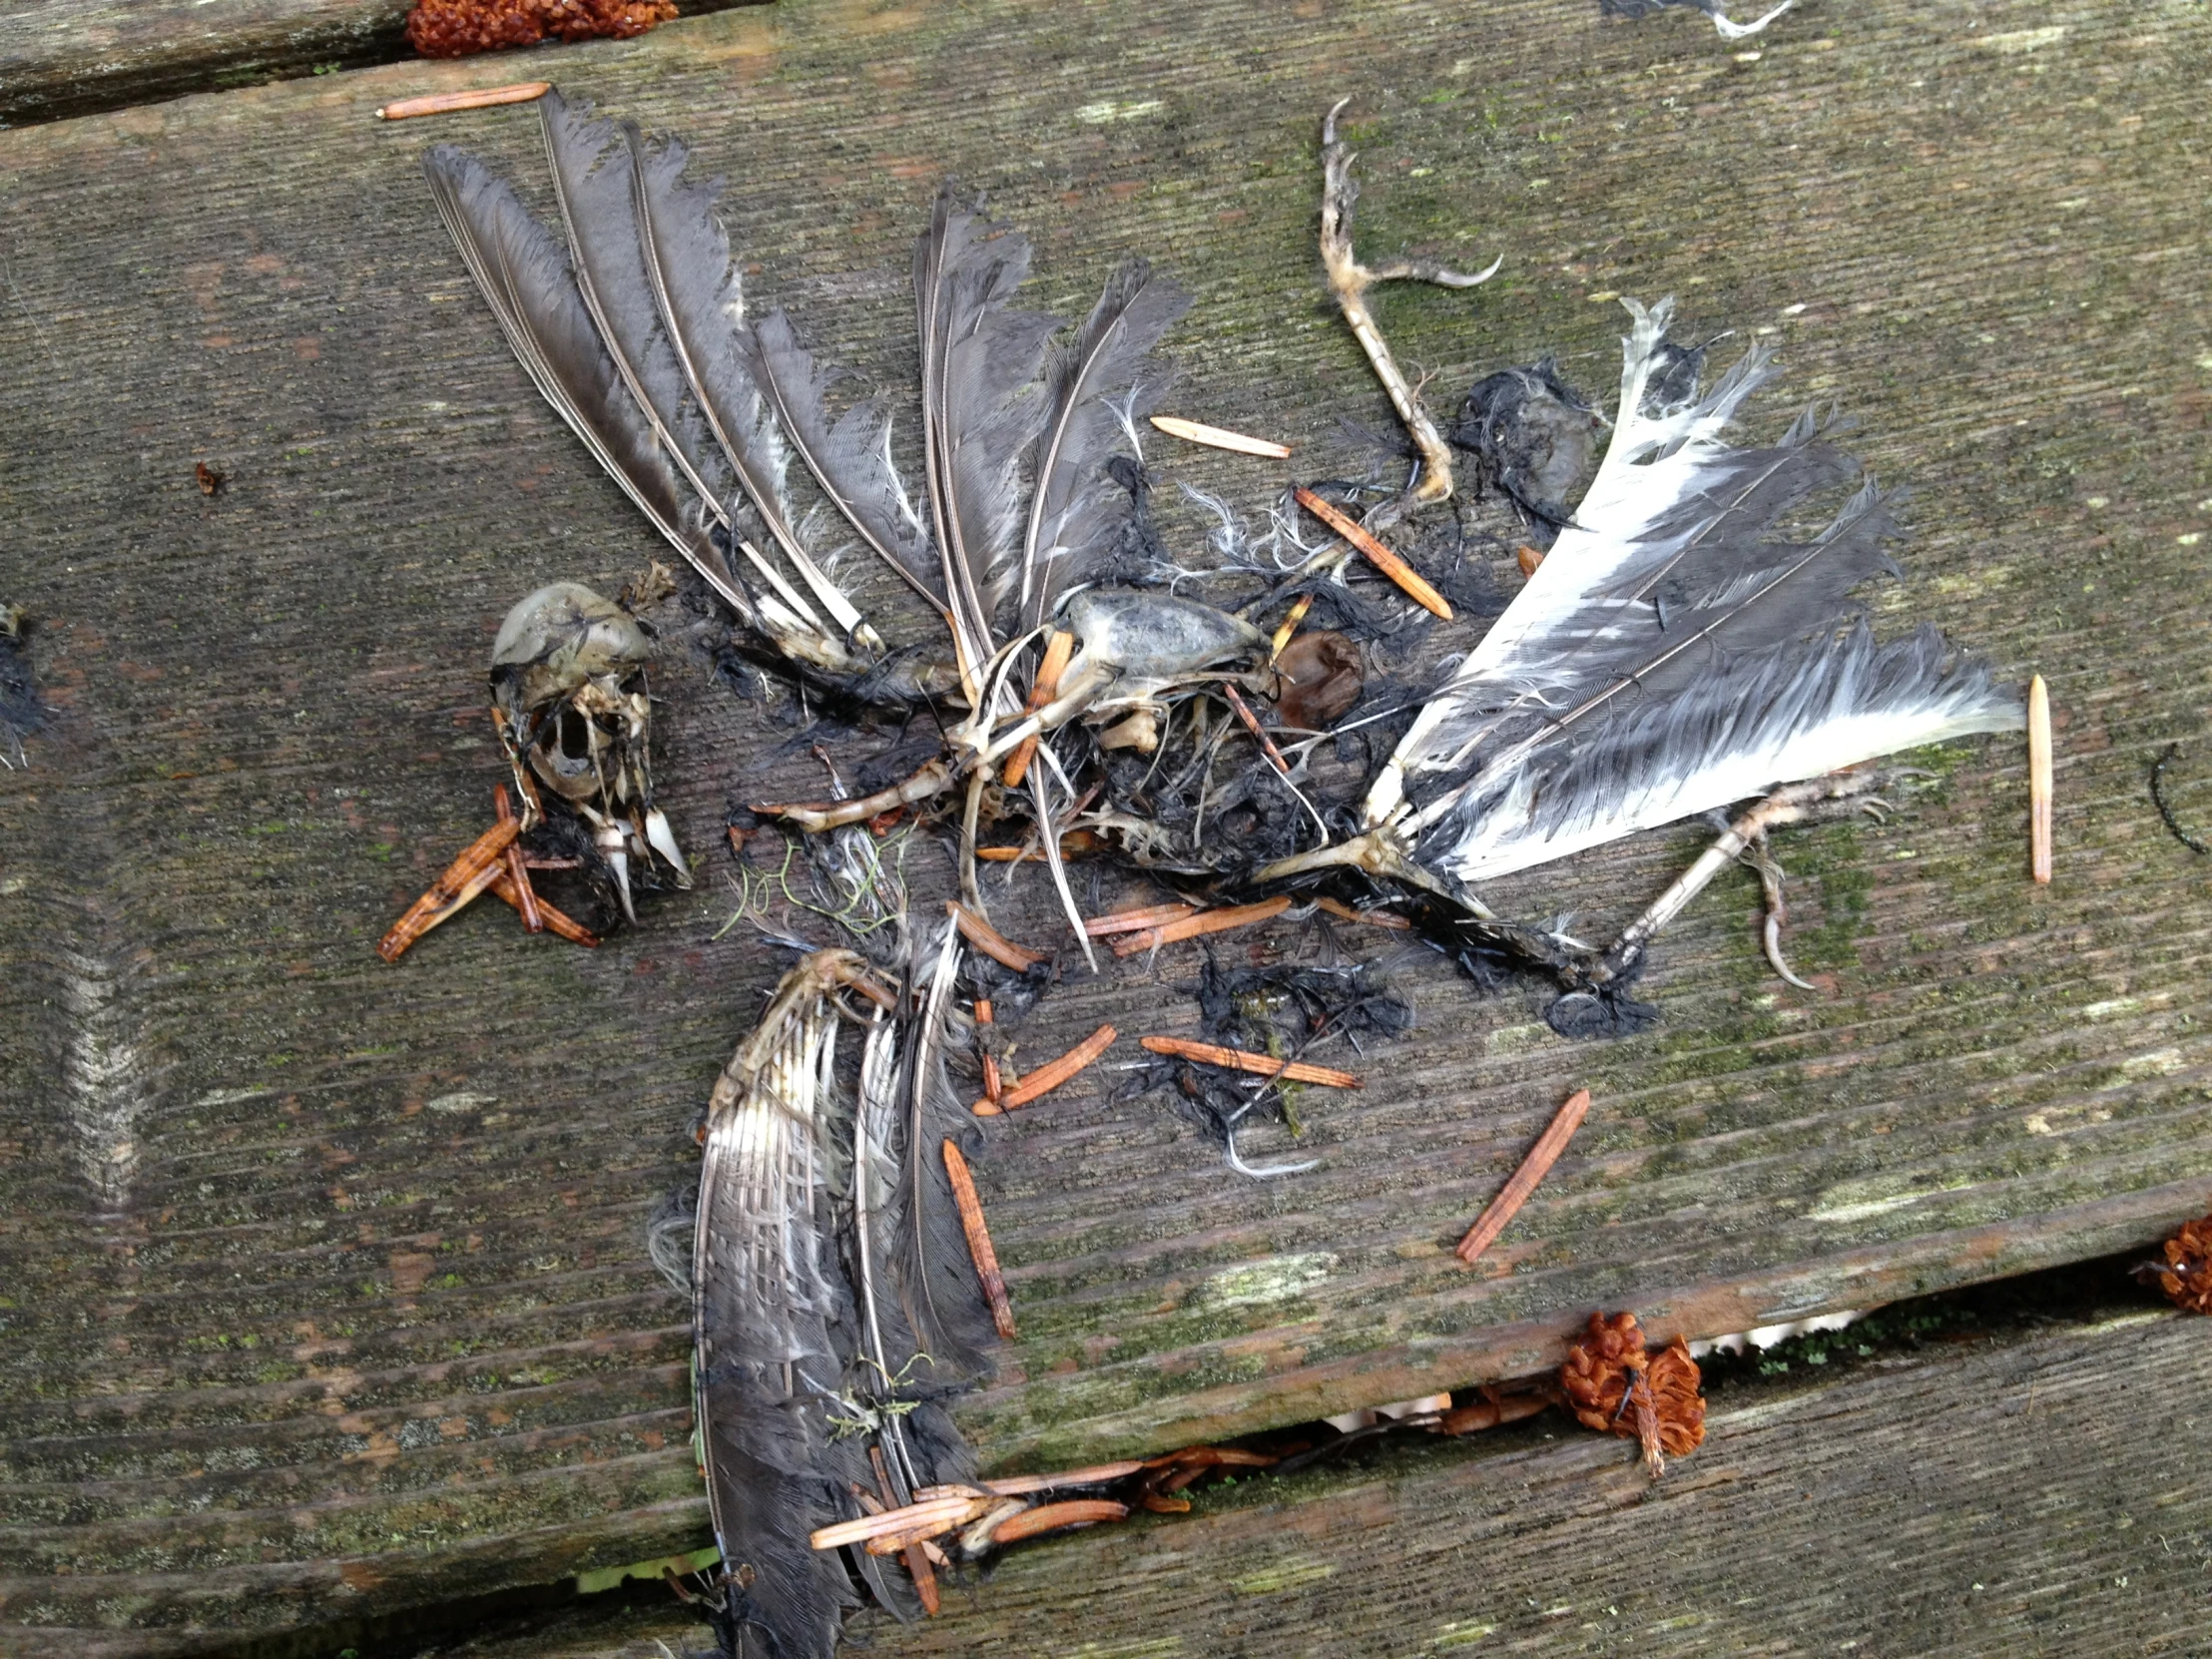 a dead bird is shown laying on the ground